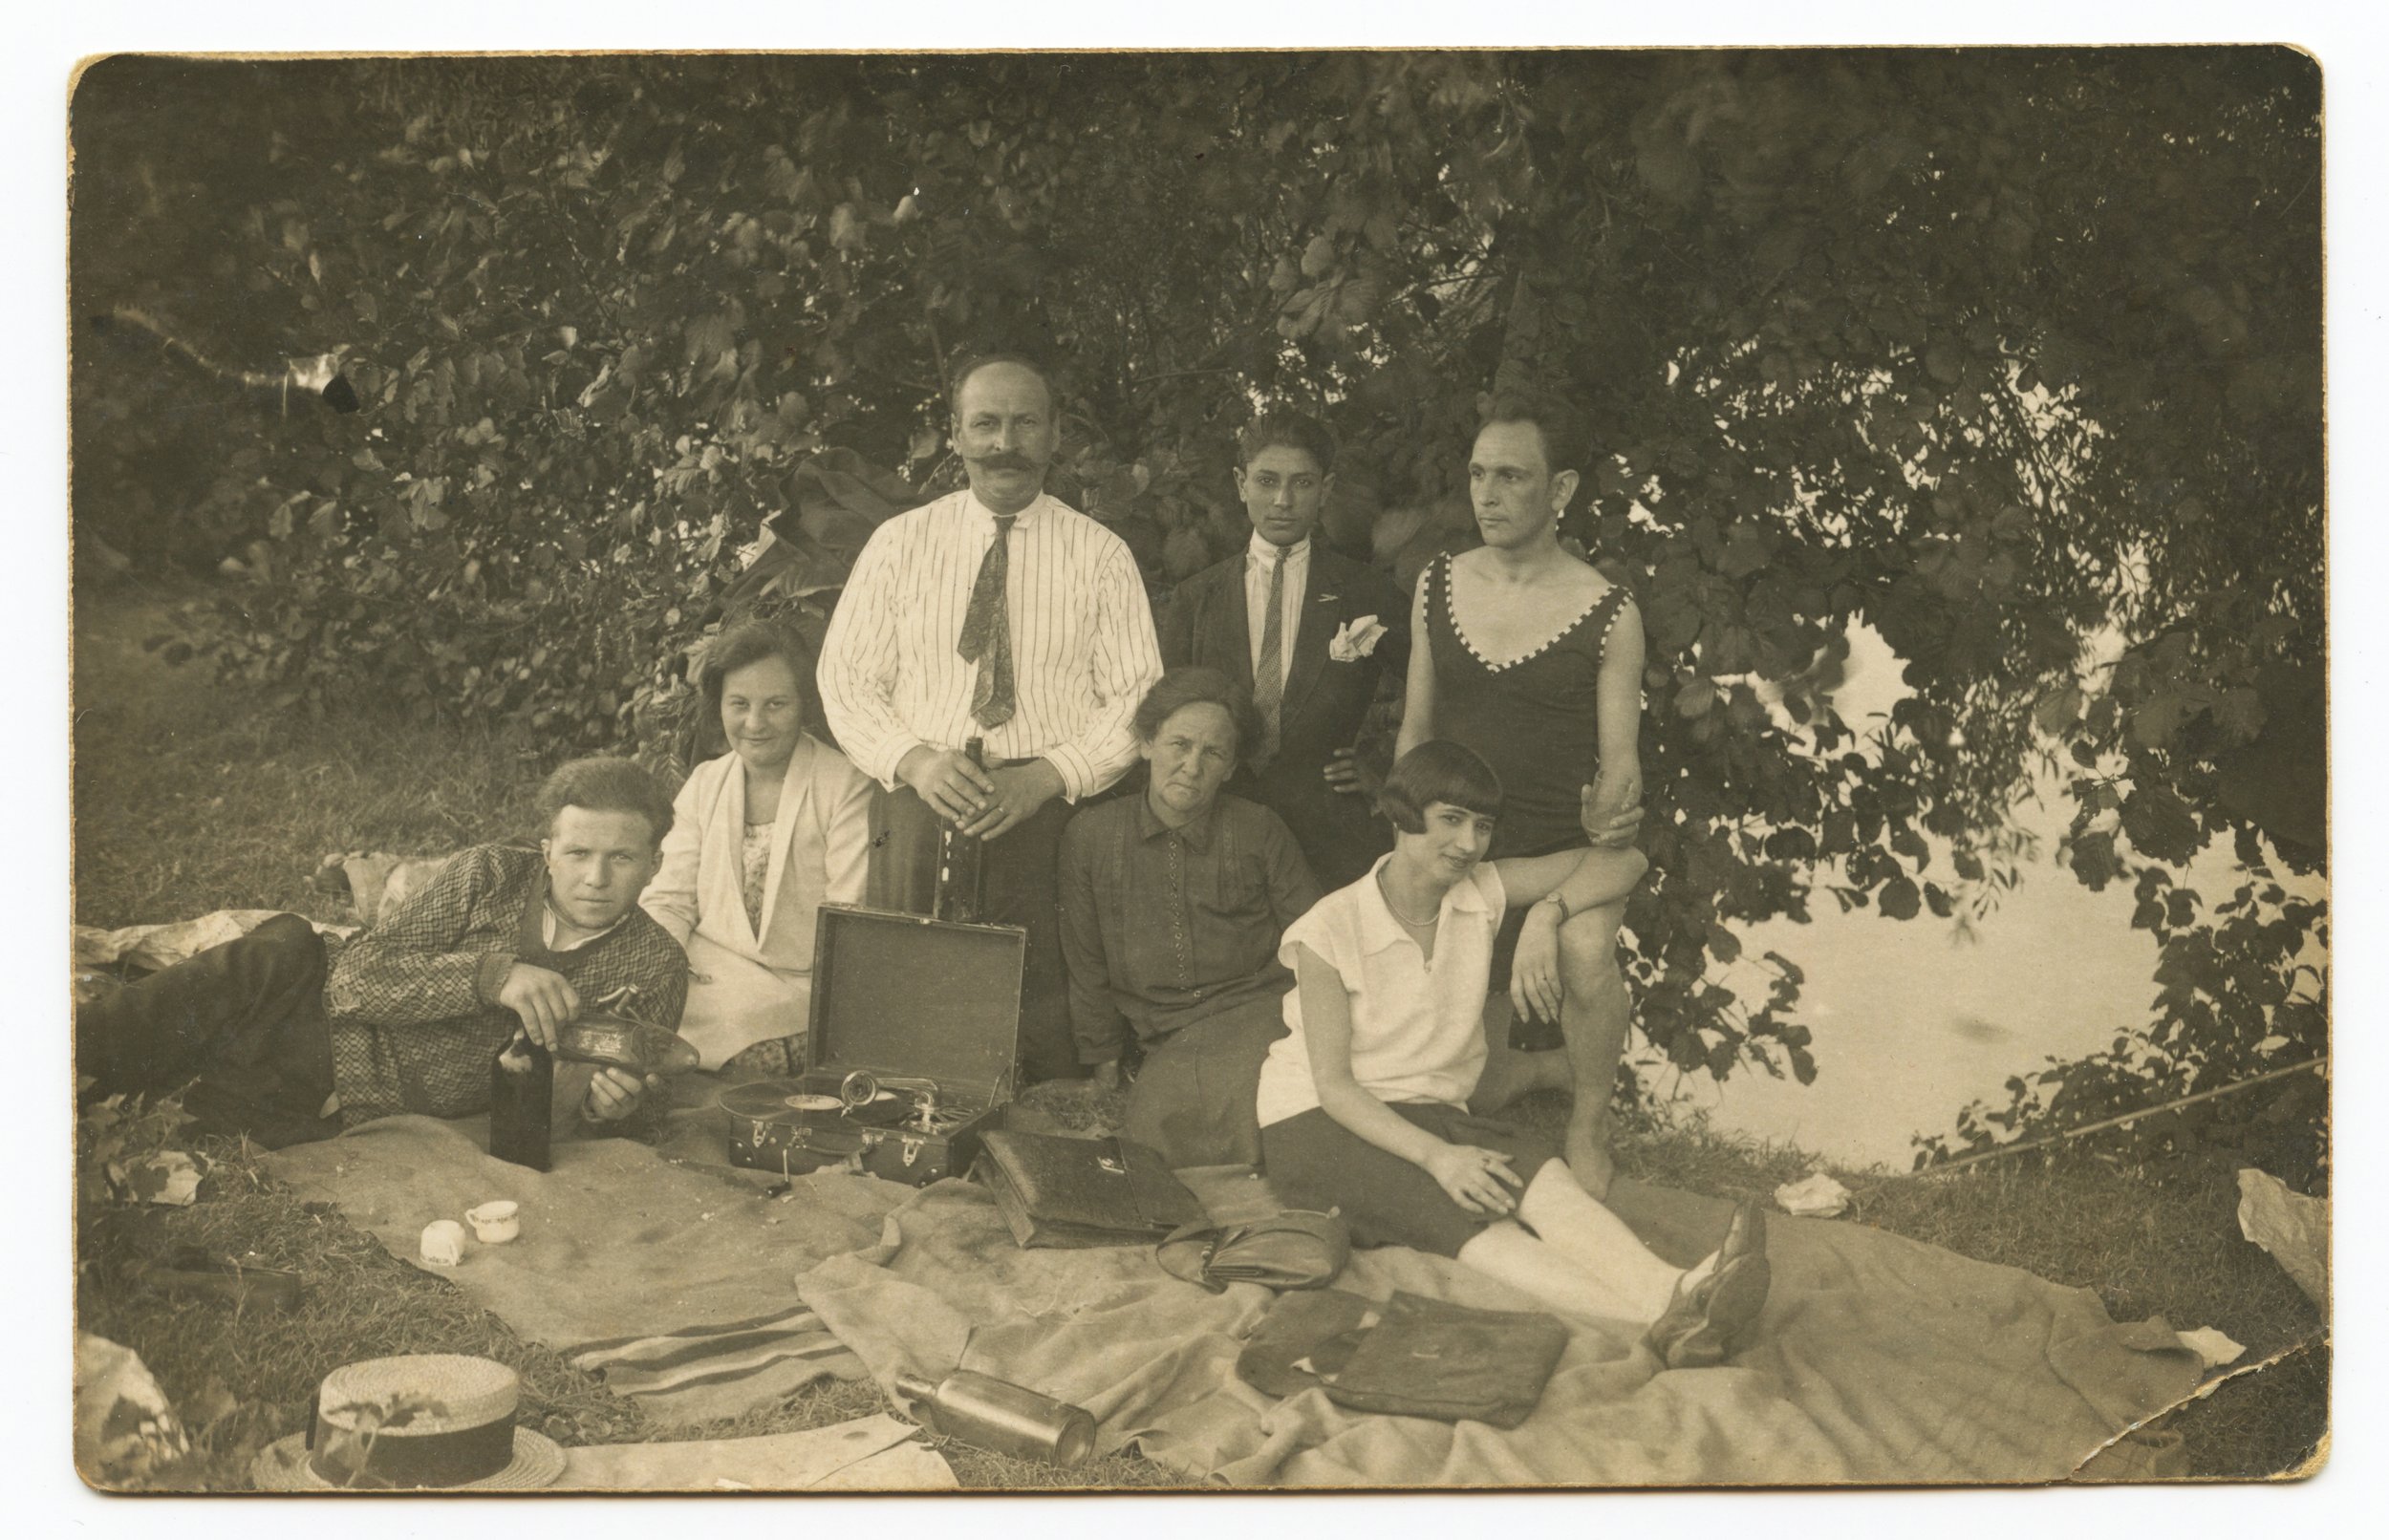 Mom as a teen, bottom right, with her family in Italy.